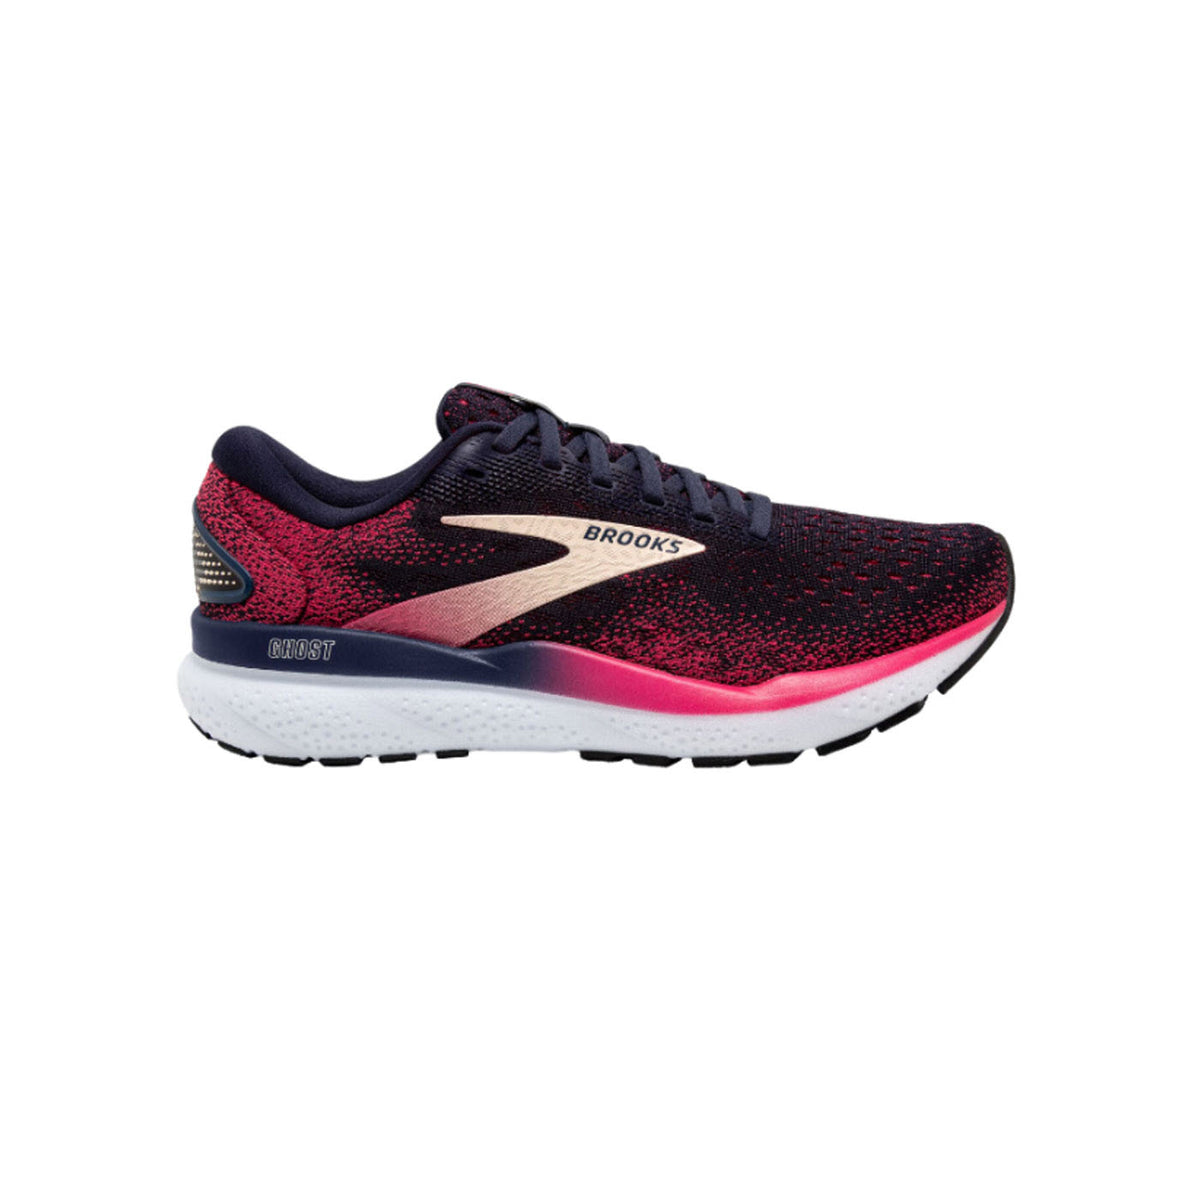 A single black and pink BROOKS GHOST 16 PEACOAT/RASPBERRY/APRICOT - WOMENS athletic running shoe with a white and black sole, featuring a &quot;Brooks&quot; logo on the side.